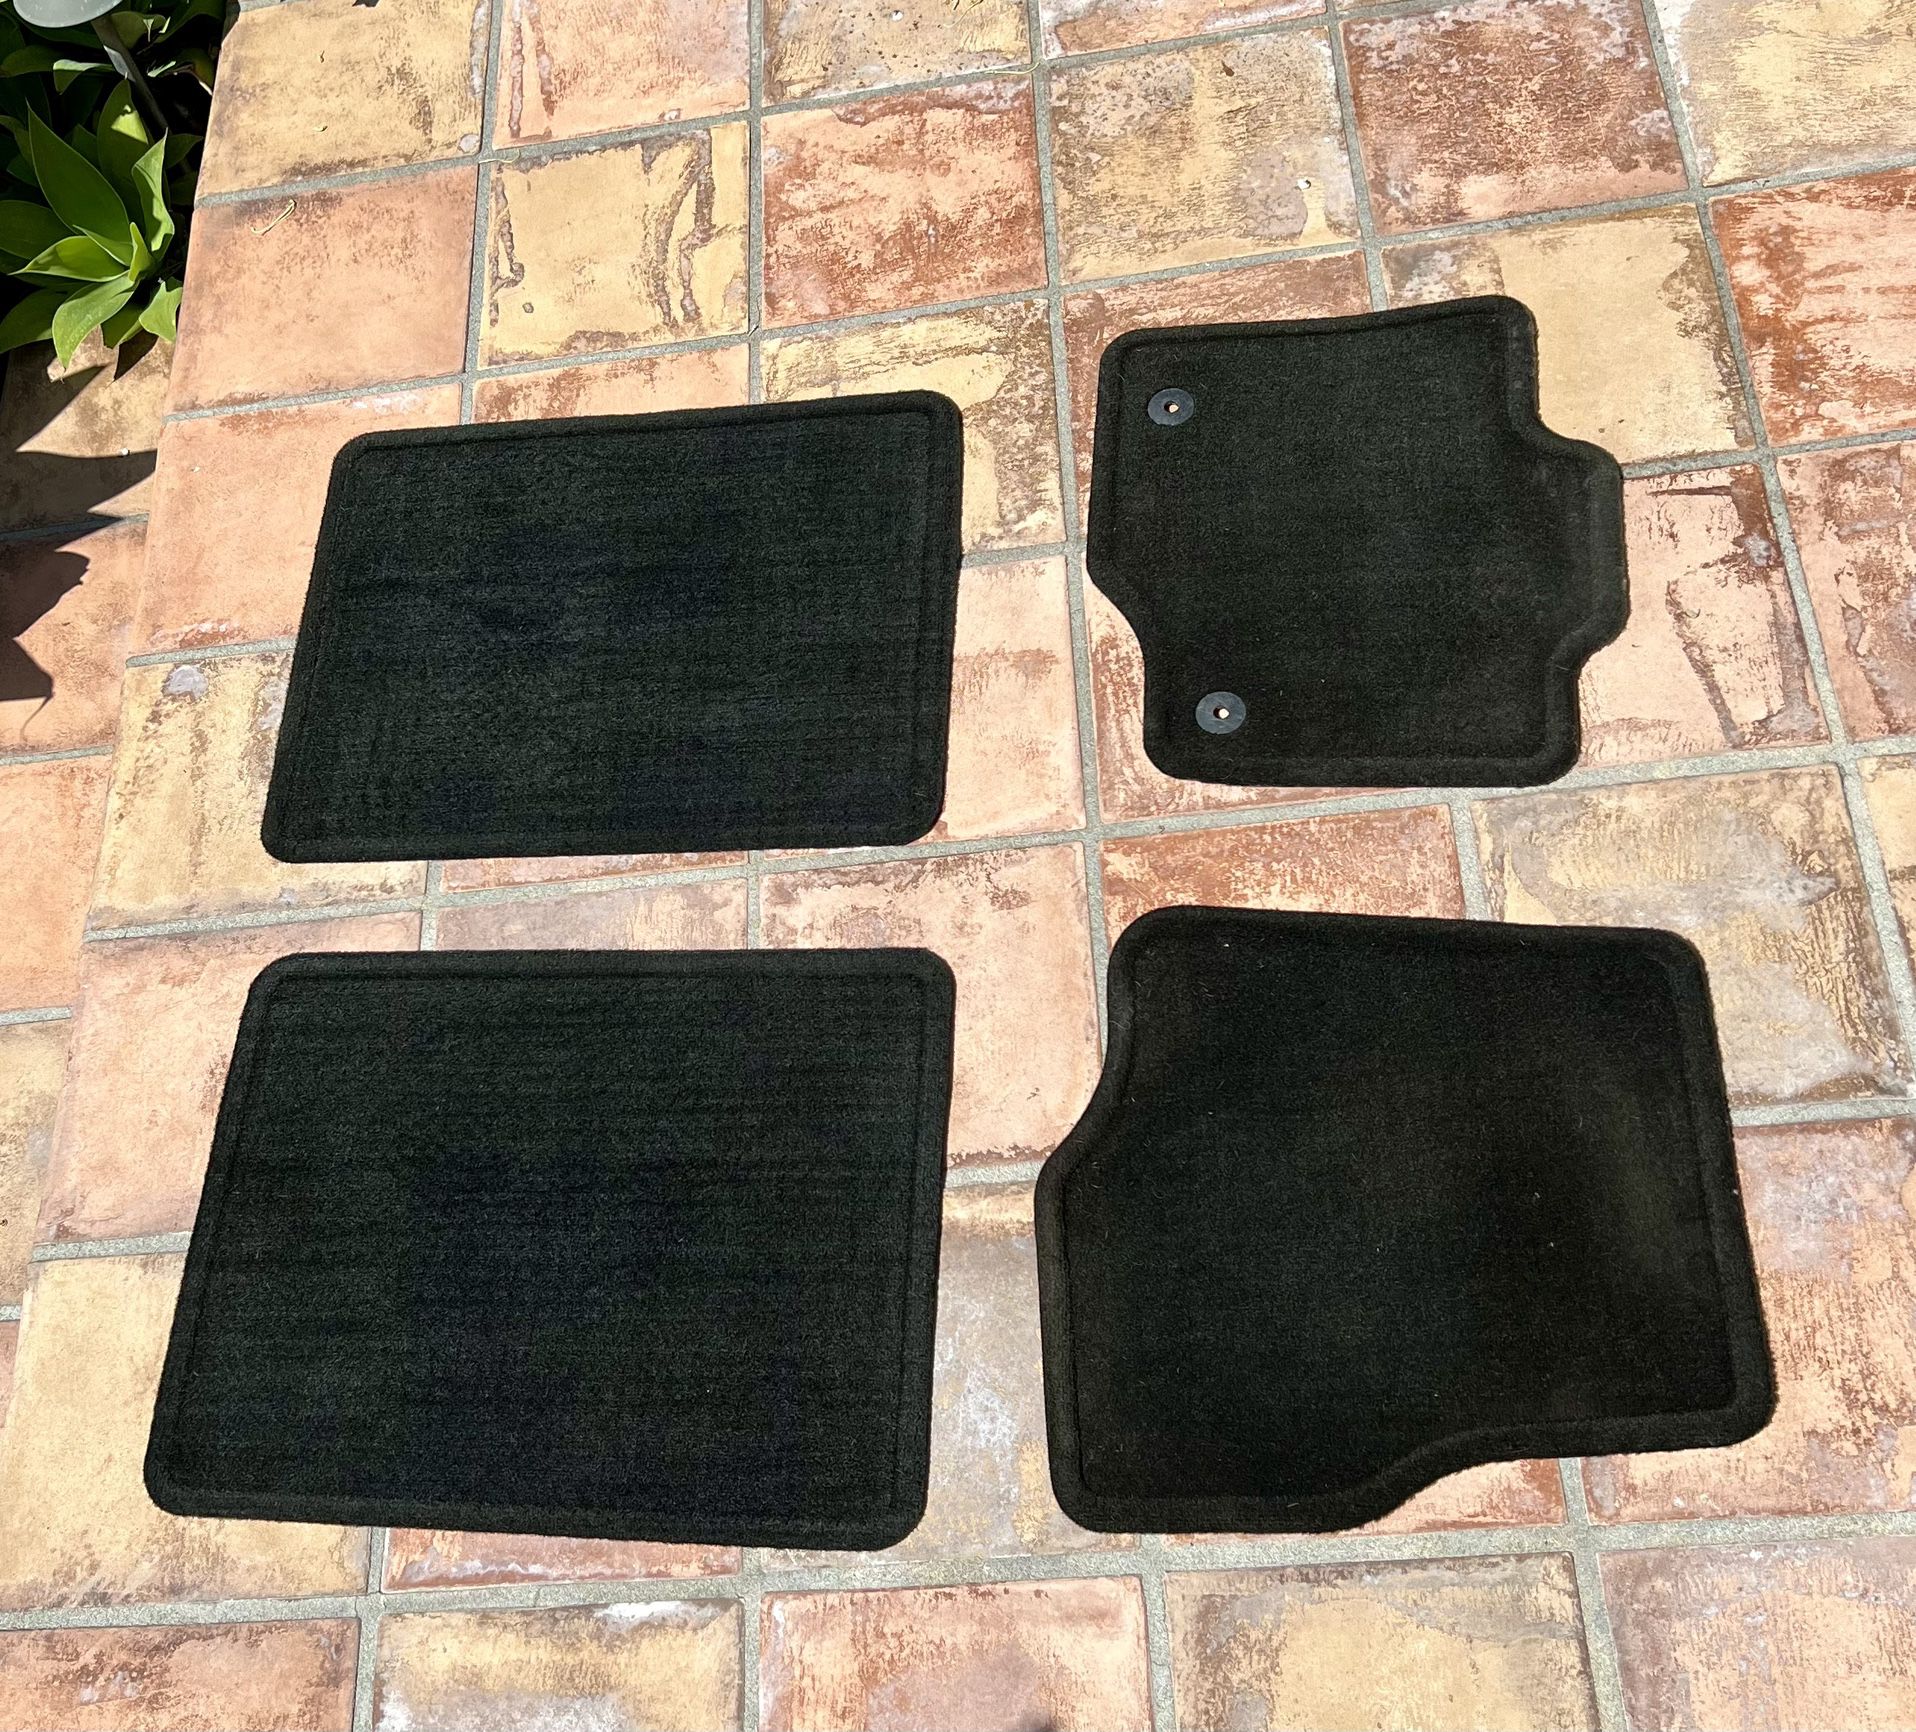 Ford OEM Floor Mats Carpet And Rubber For F150 Super Crewcab 